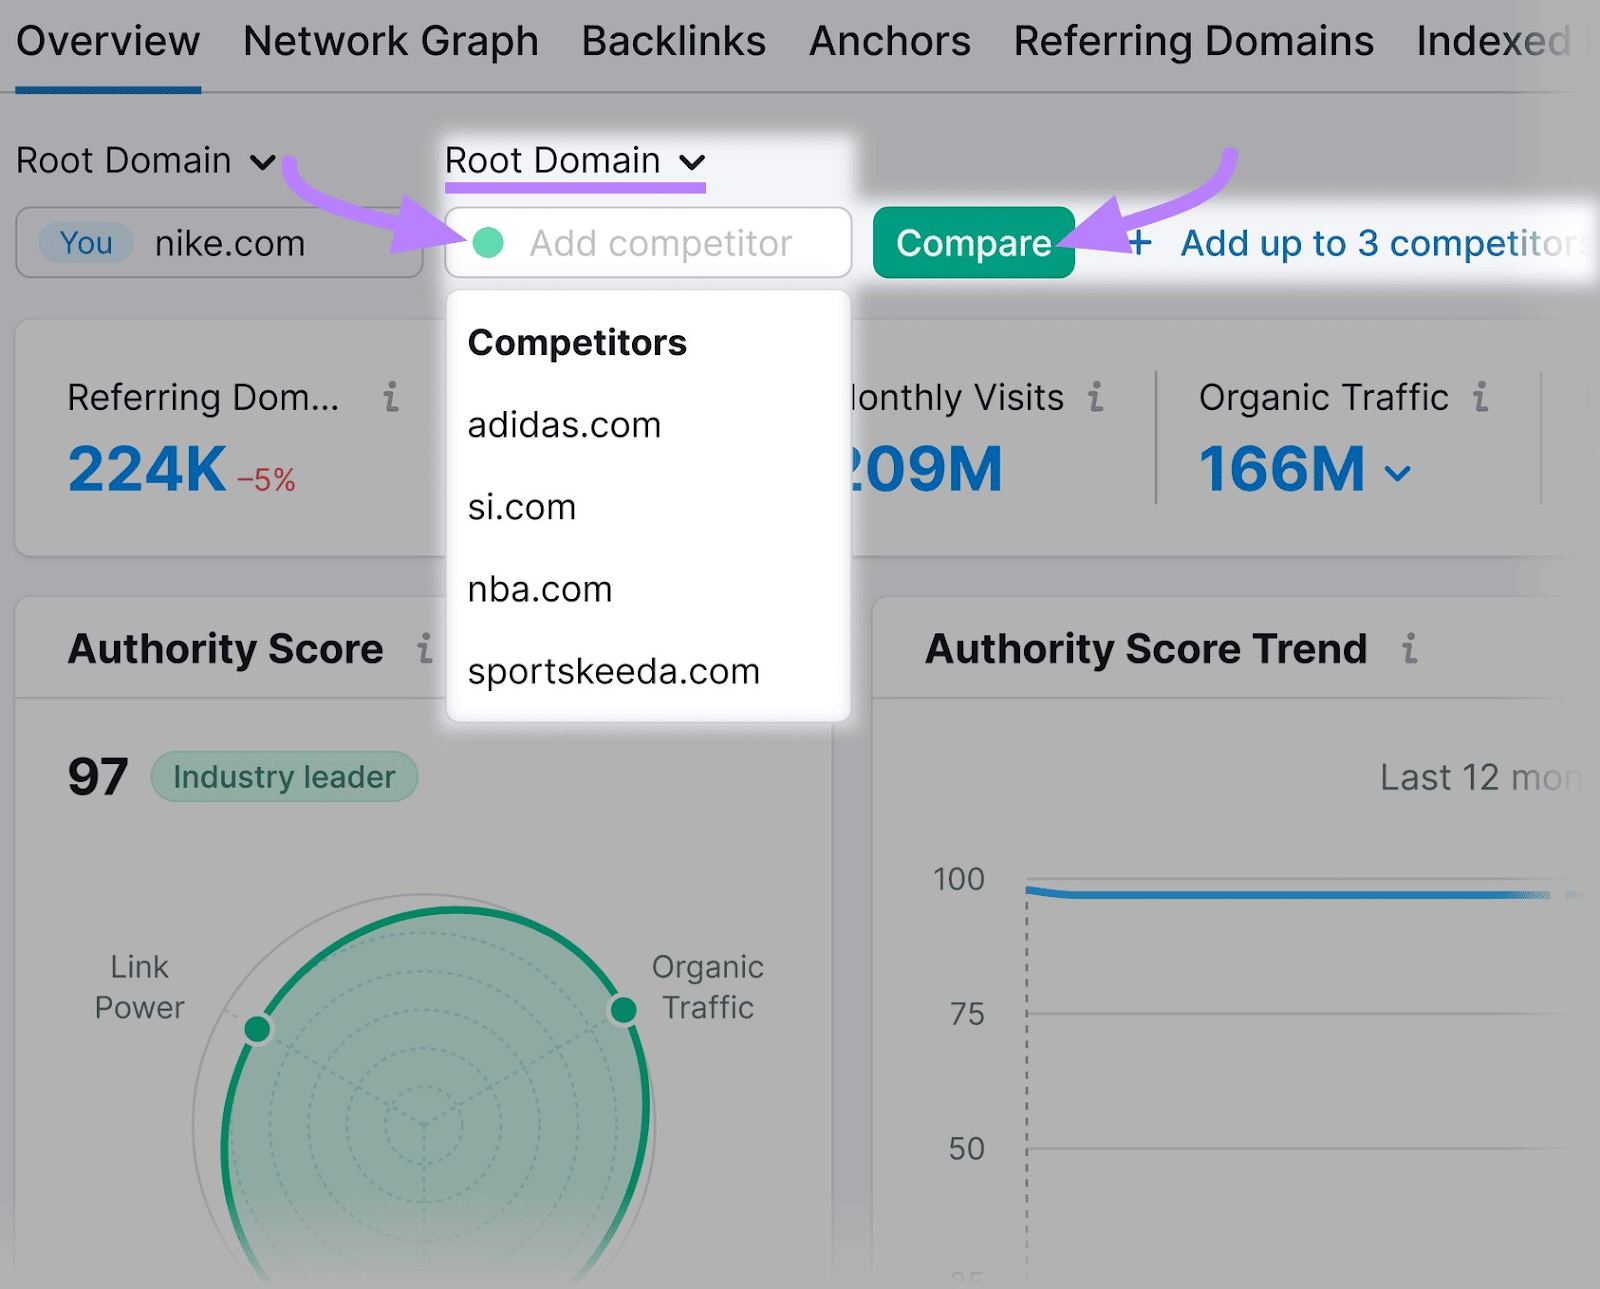 Competitors Suggested For &Quot;Nike.com&Quot; In Backlink Analytics Tool